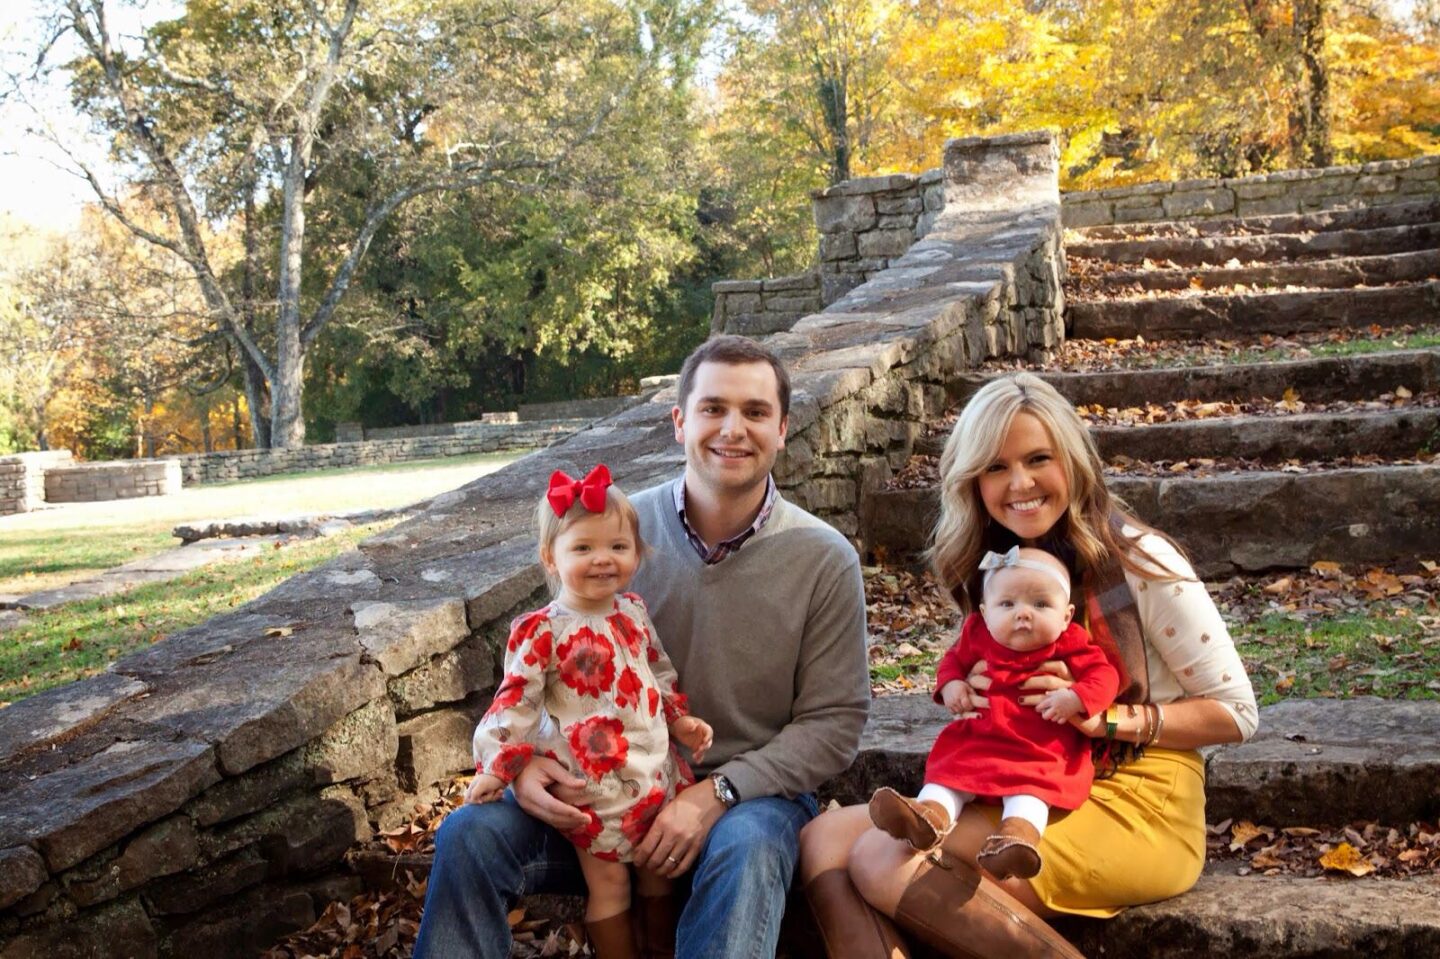 10 Year Wedding Anniversary by popular Nashville lifestyle blog, Hello Happiness: image of a mom, dad, and their two young girls sitting together on some stone steps covered in leaves. 